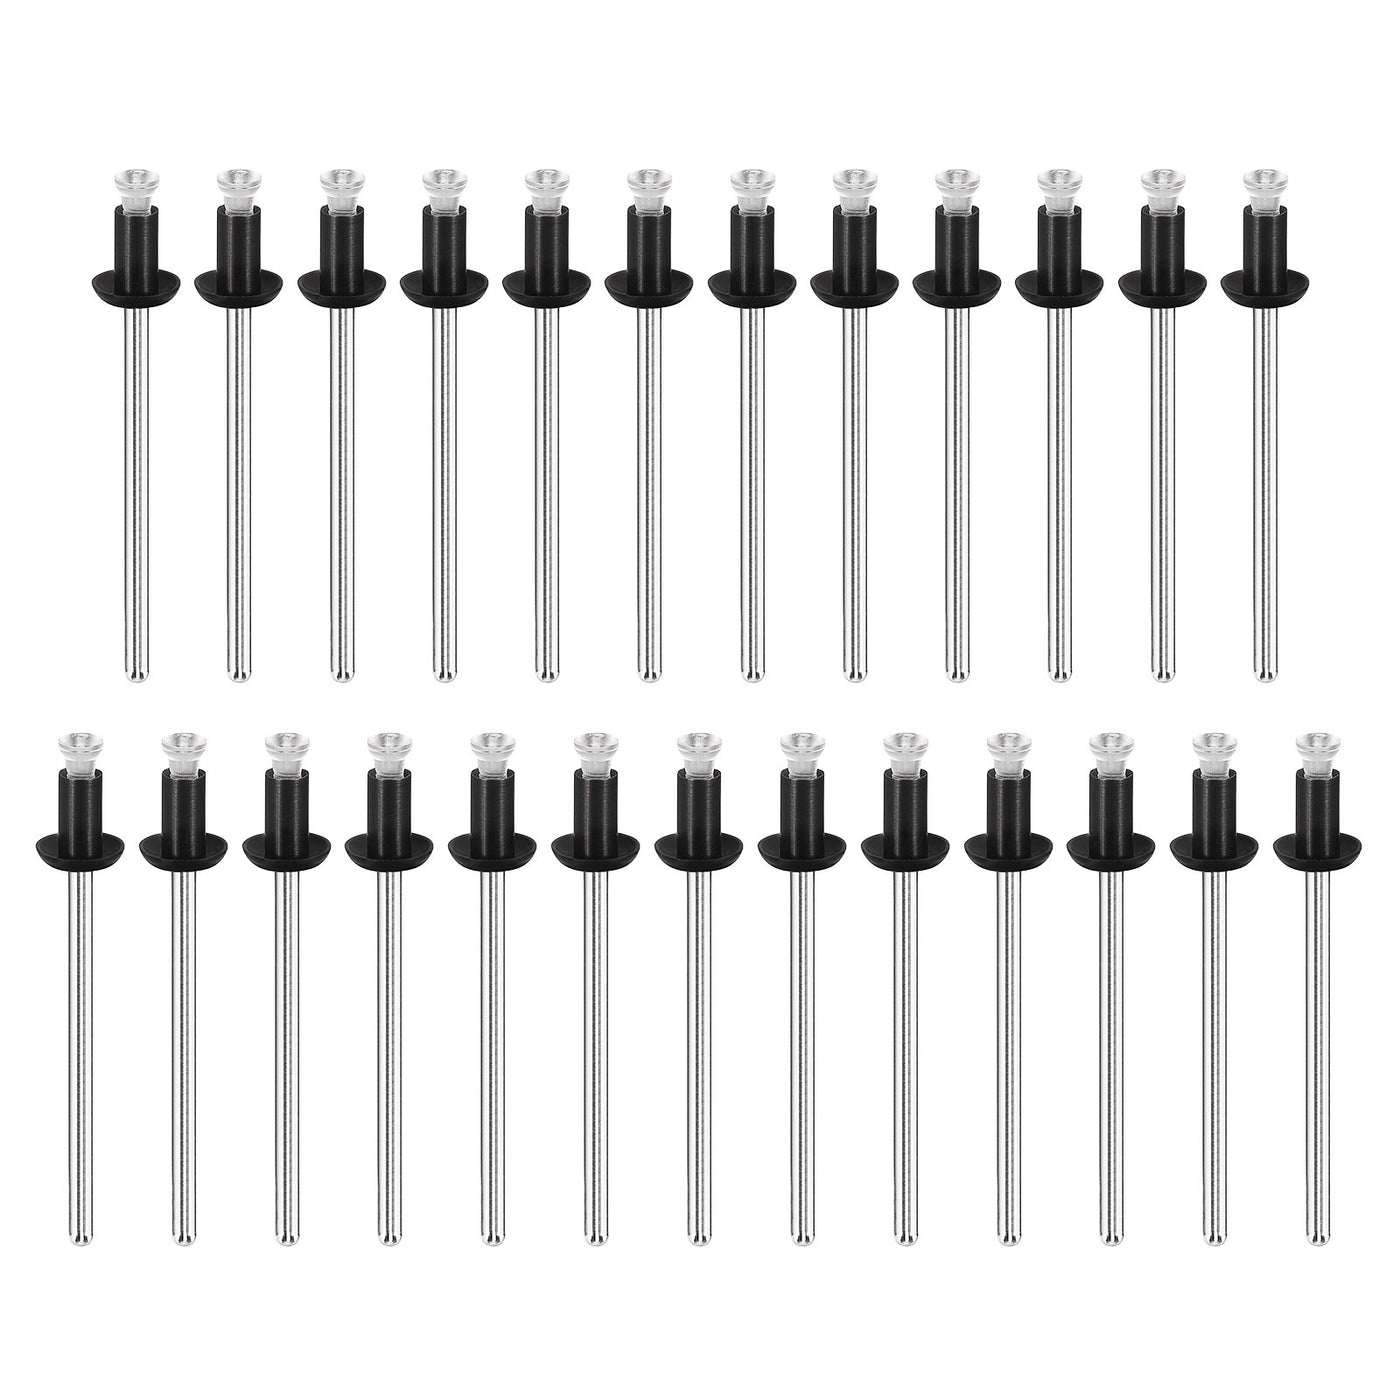 uxcell Uxcell 4mm x 6.4mm Nylon Blind Rivets for PC Board Bumper Trim Retainer, Black 25Pcs